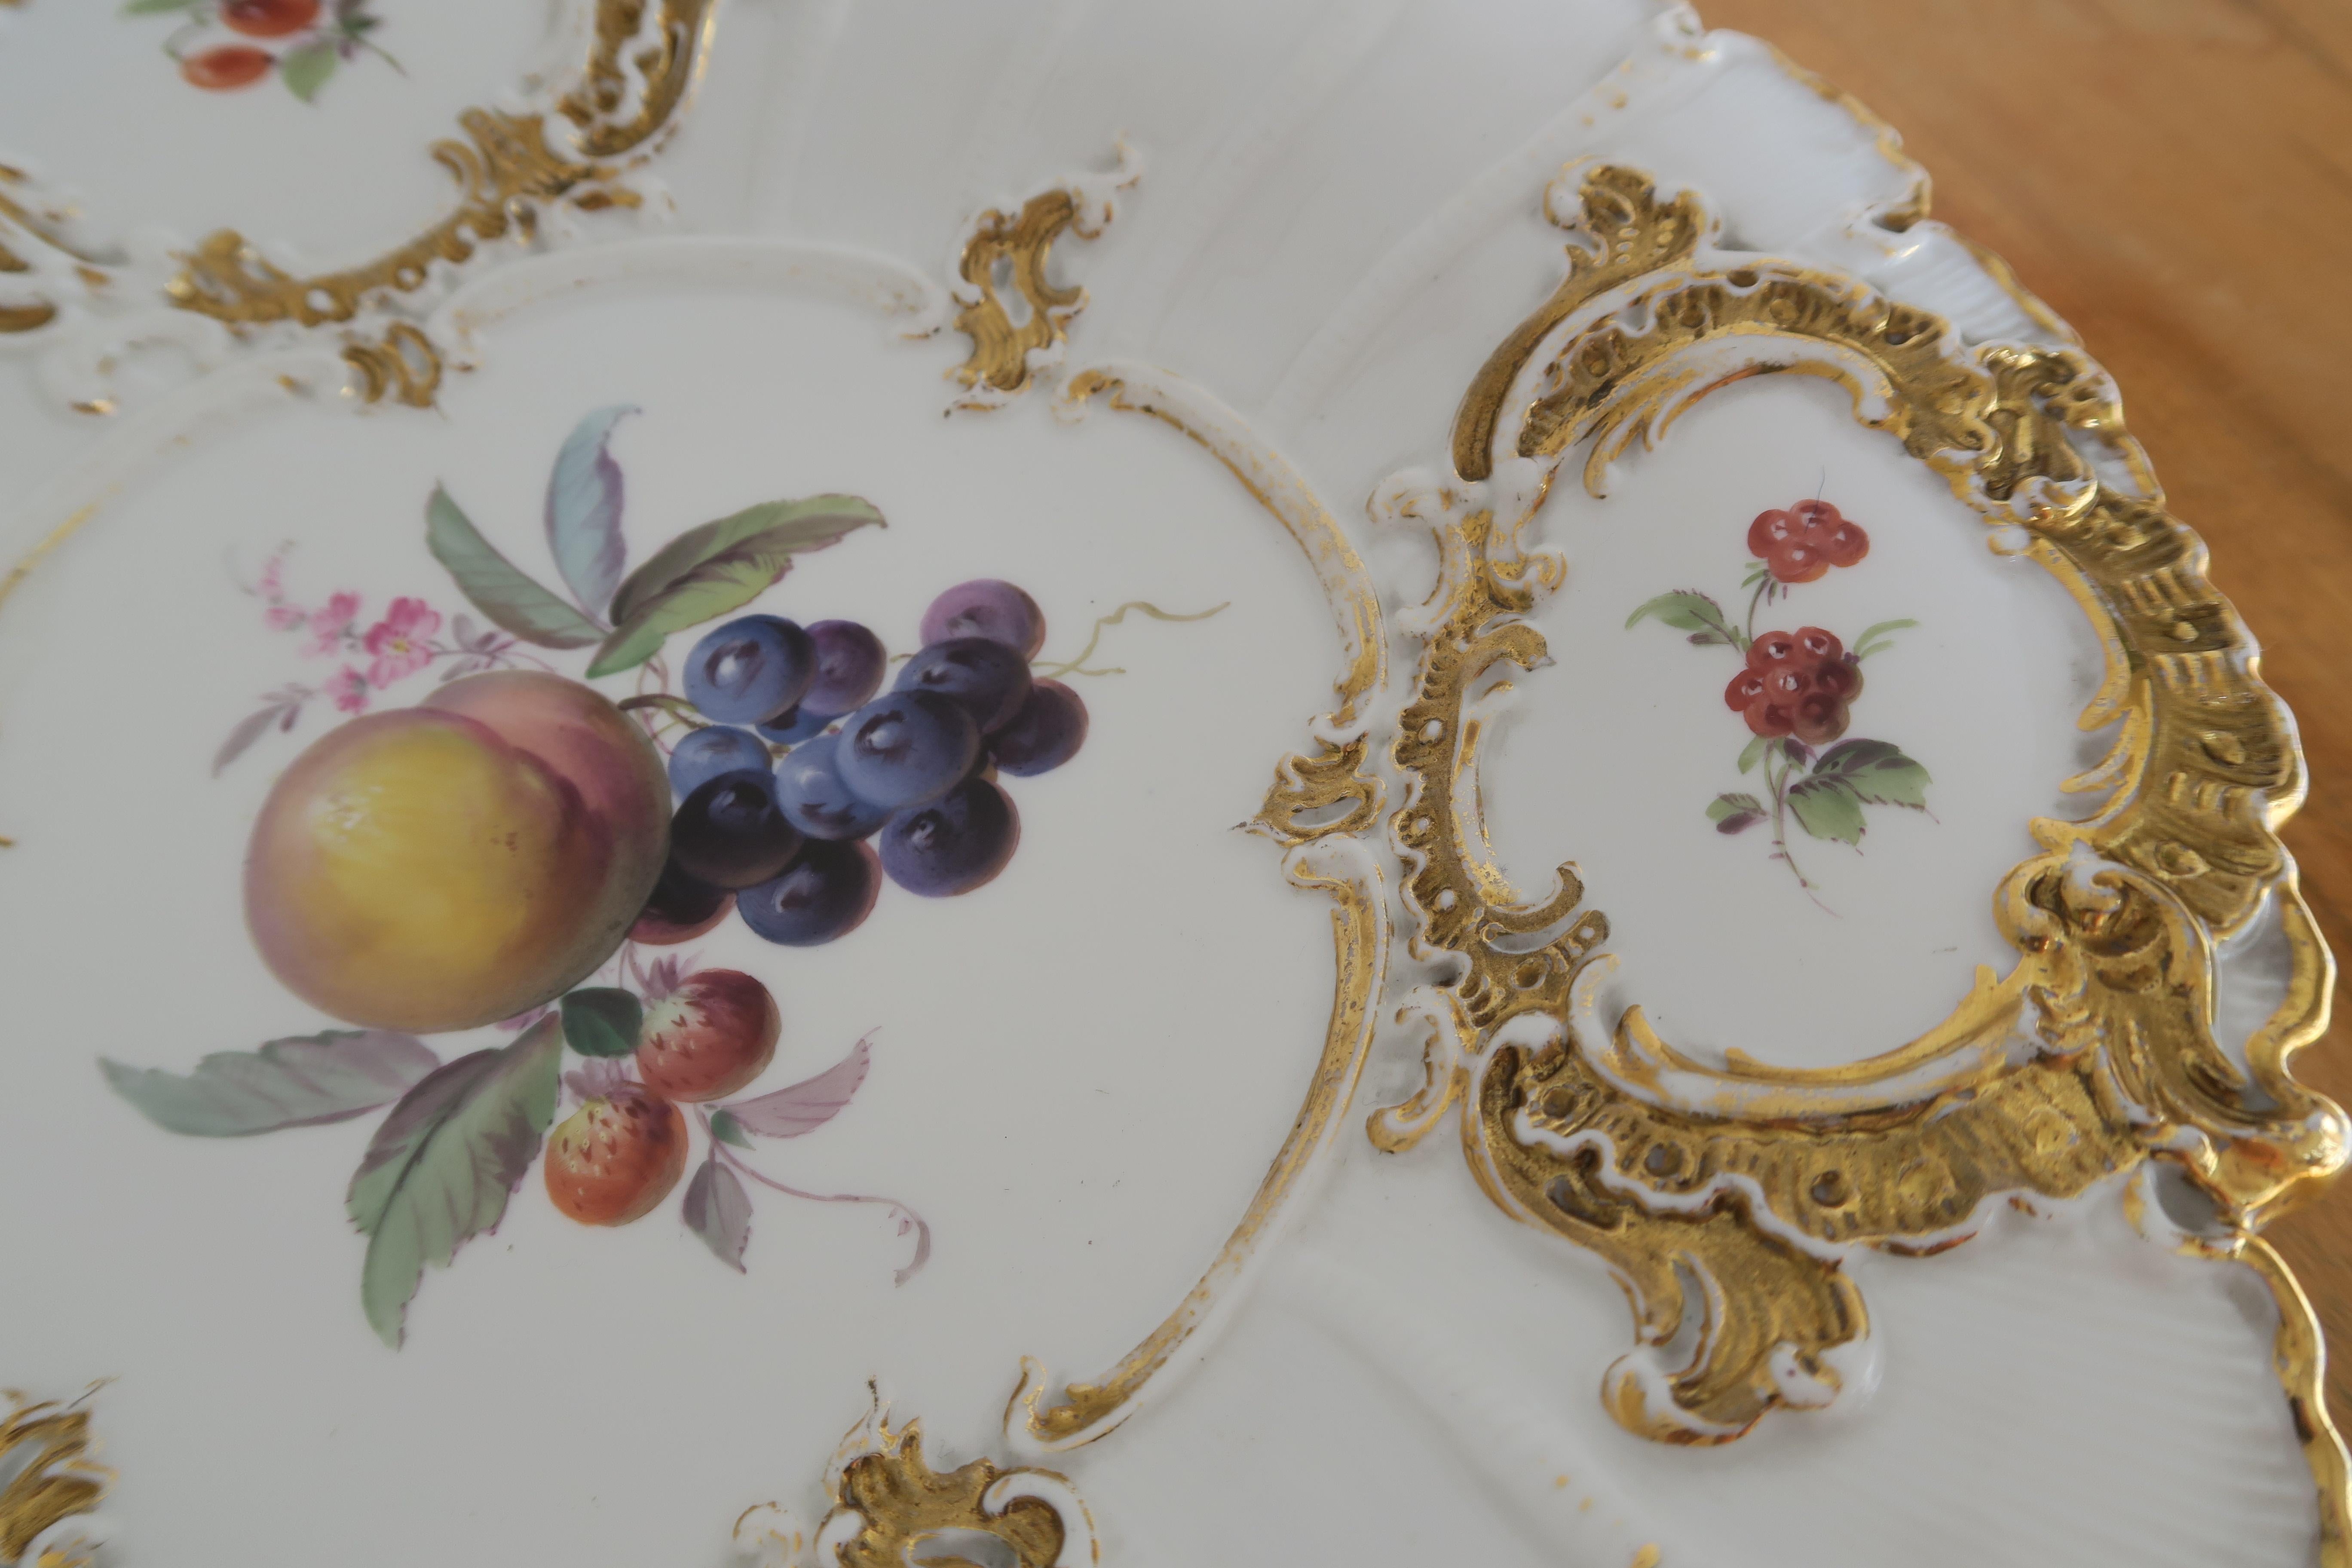 Original fruit bowl/serving bowl by porcelain manufacturer Meissen featuring beautiful hand painted fruit and ornaments. First quality. Gilded rim slightly rubbed off. No chips, dents or scratches.

Measures: Diameter 38.3 cm.
Hight 4.7 cm.